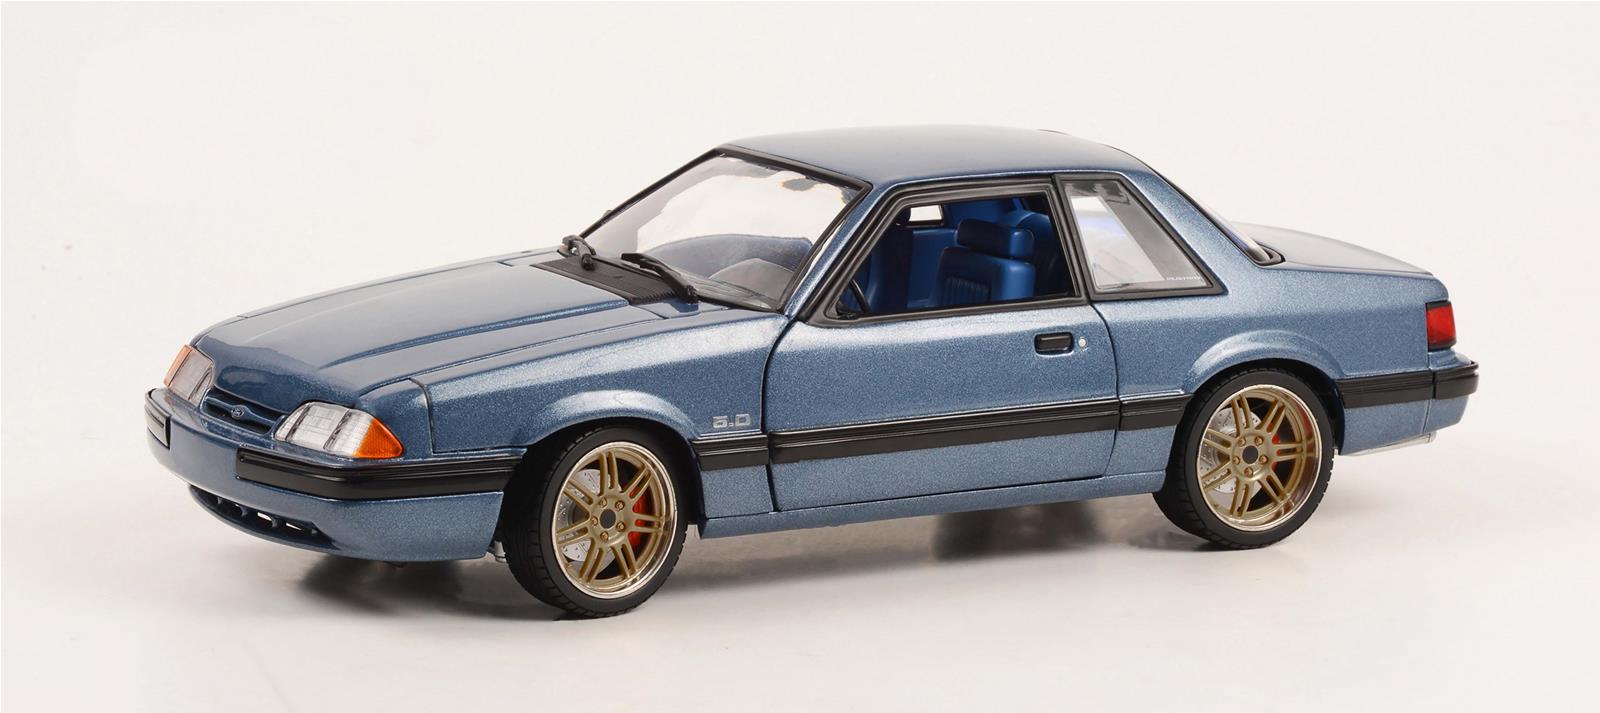 GMP GMP-18977 1:18 Scale 1989 Ford Mustang 5.0 LX Diecast Model